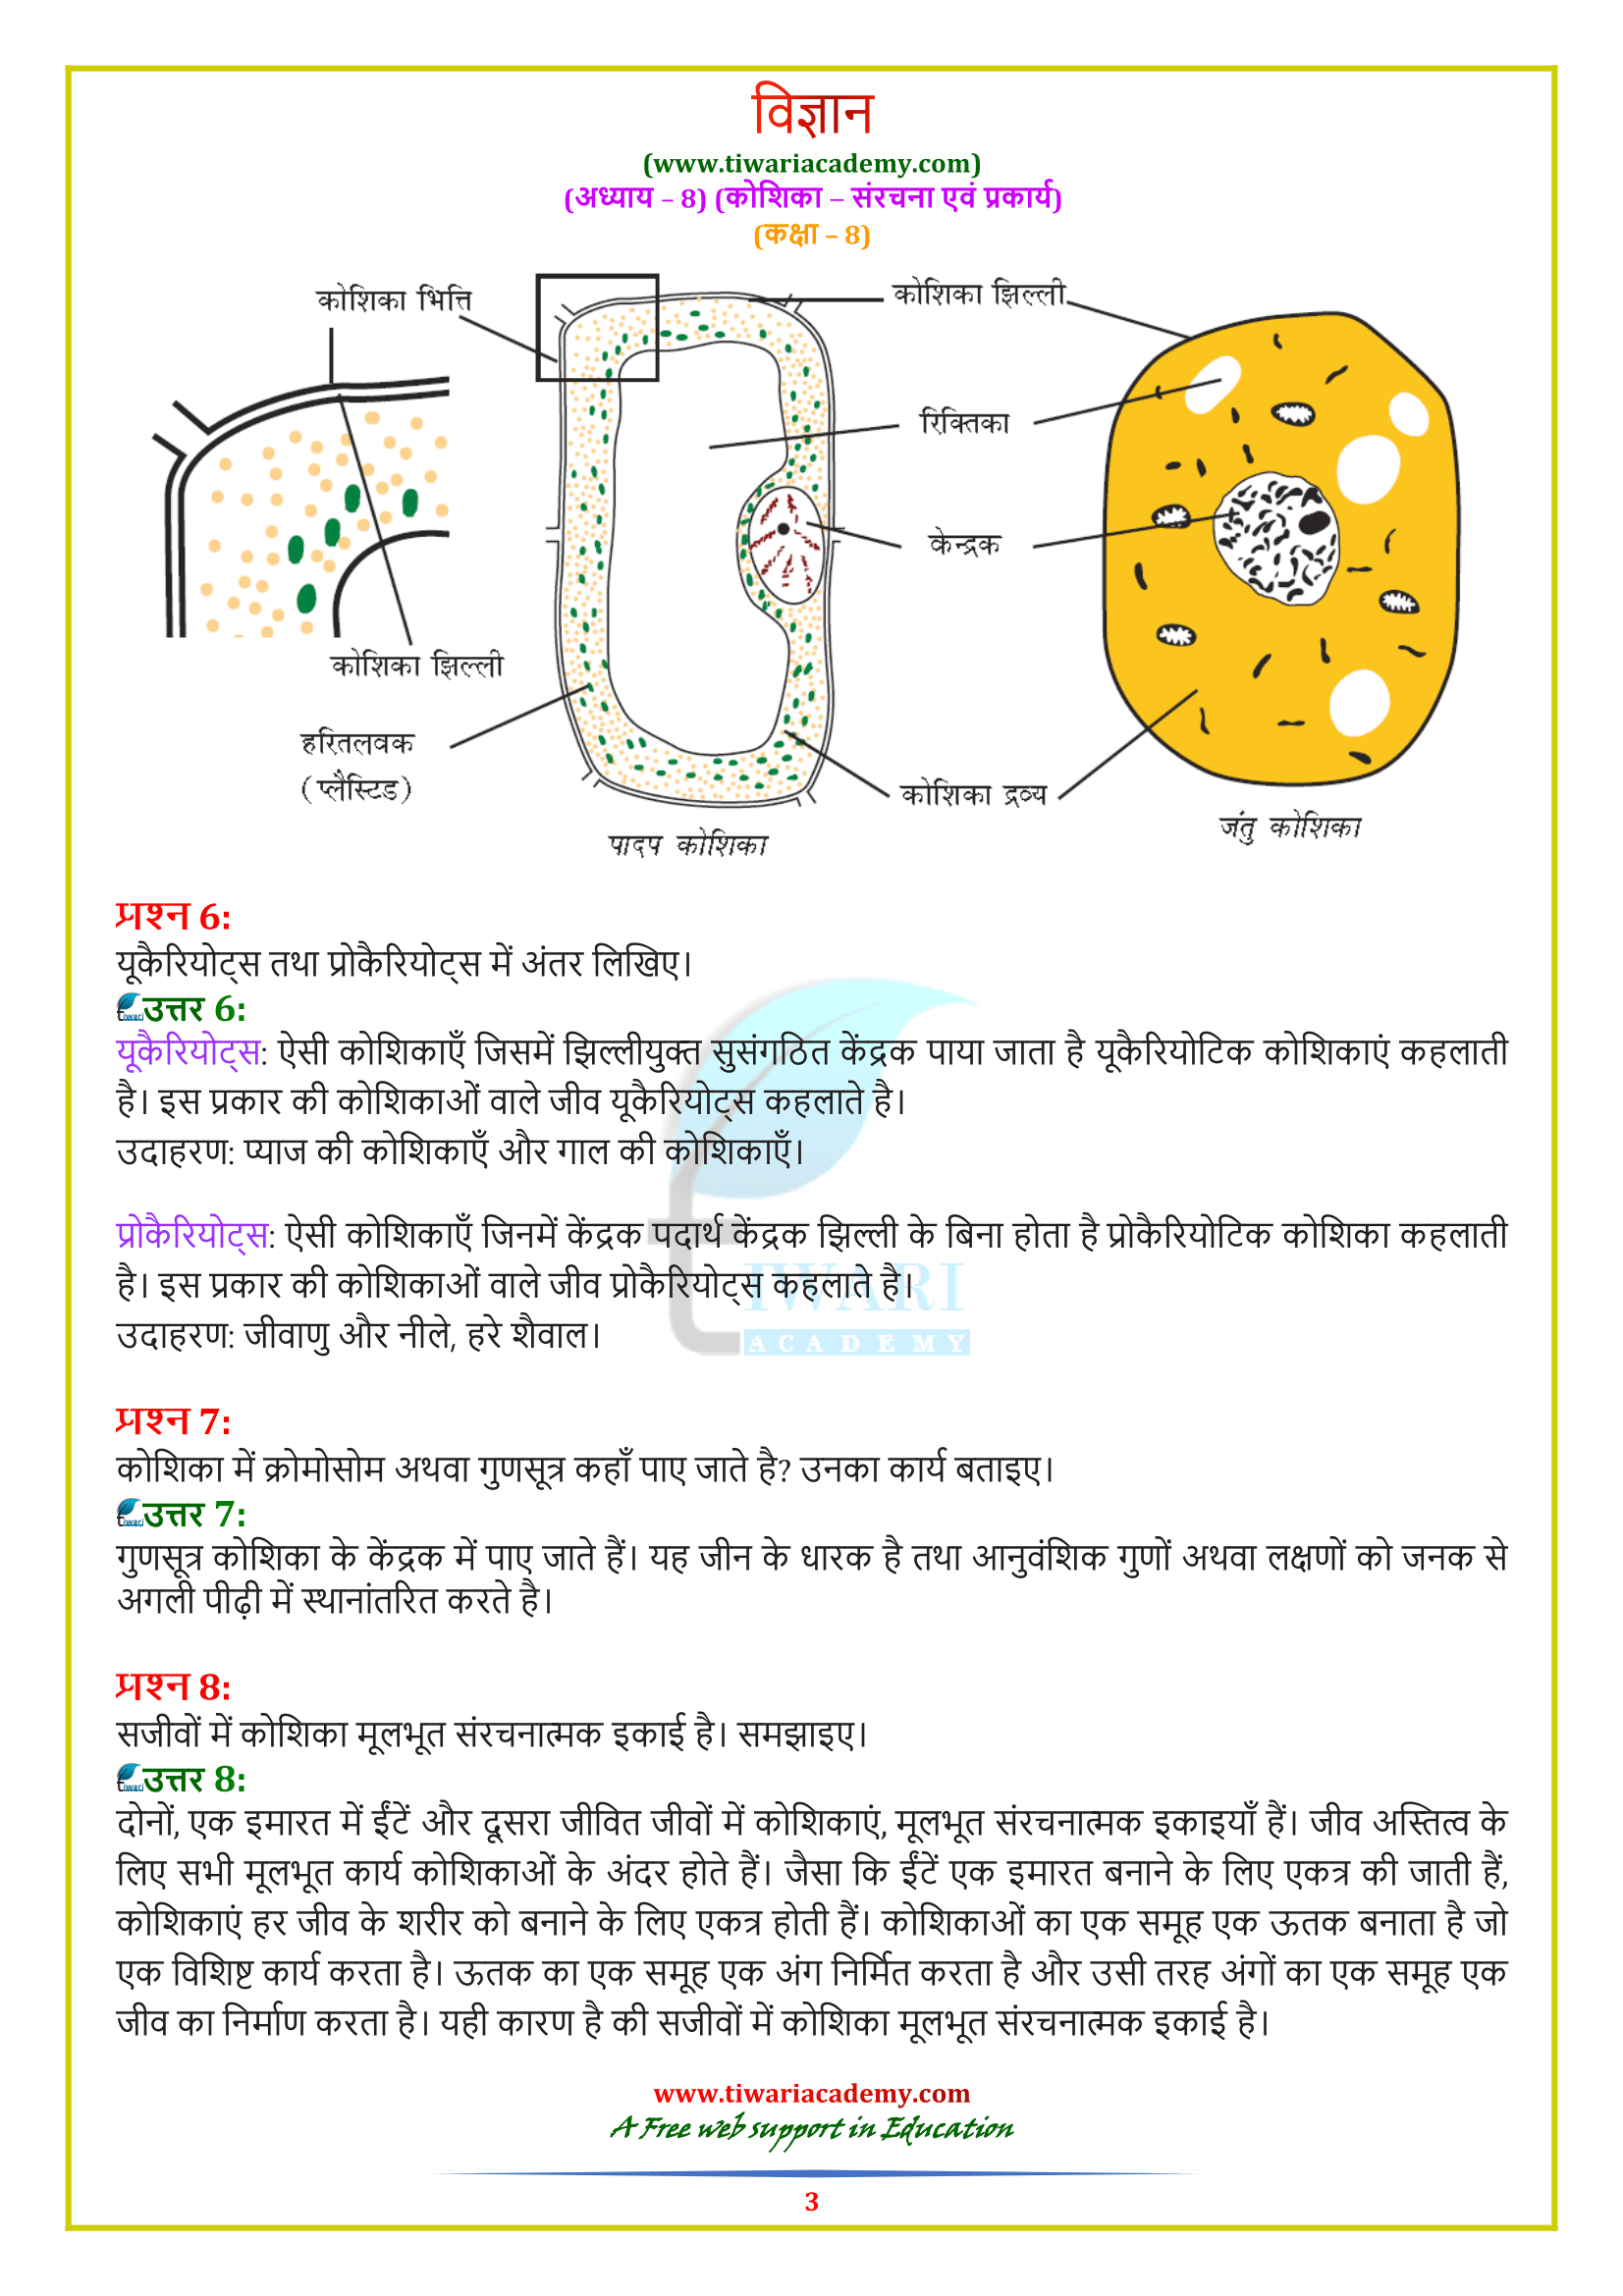 NCERT Solutions for Class 8 Science Chapter 8 Hindi English 2022-2023.